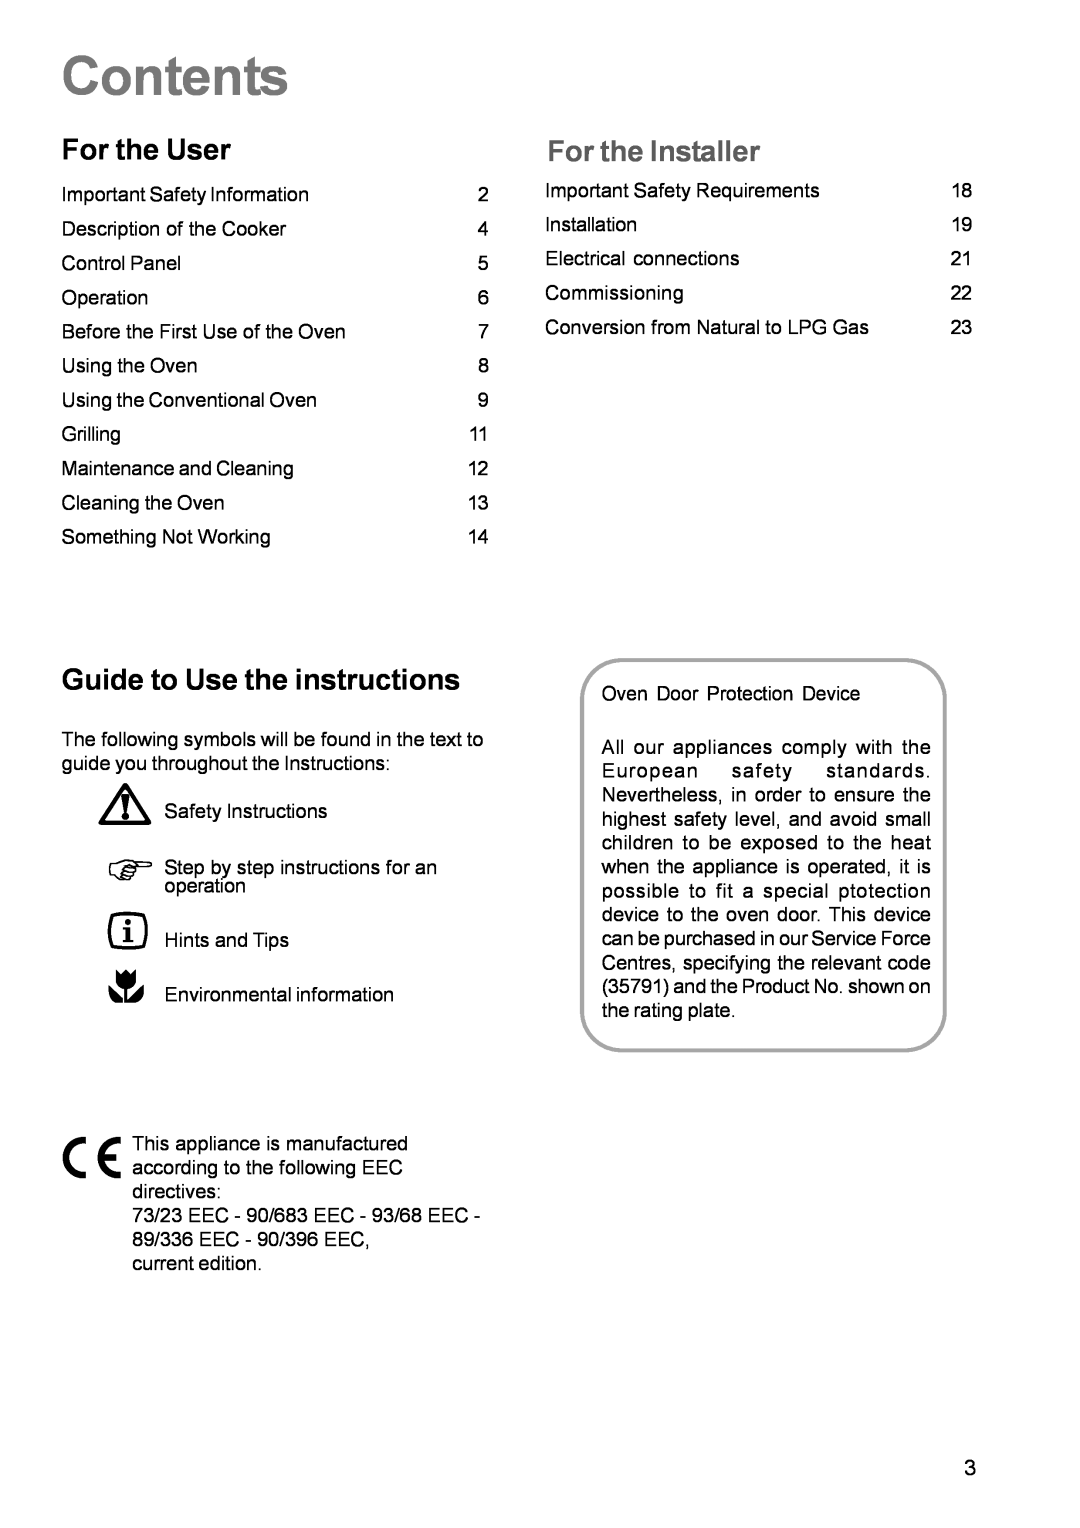 Electrolux EK 5731 manual Contents, For the User, For the Installer, Guide to Use the instructions 